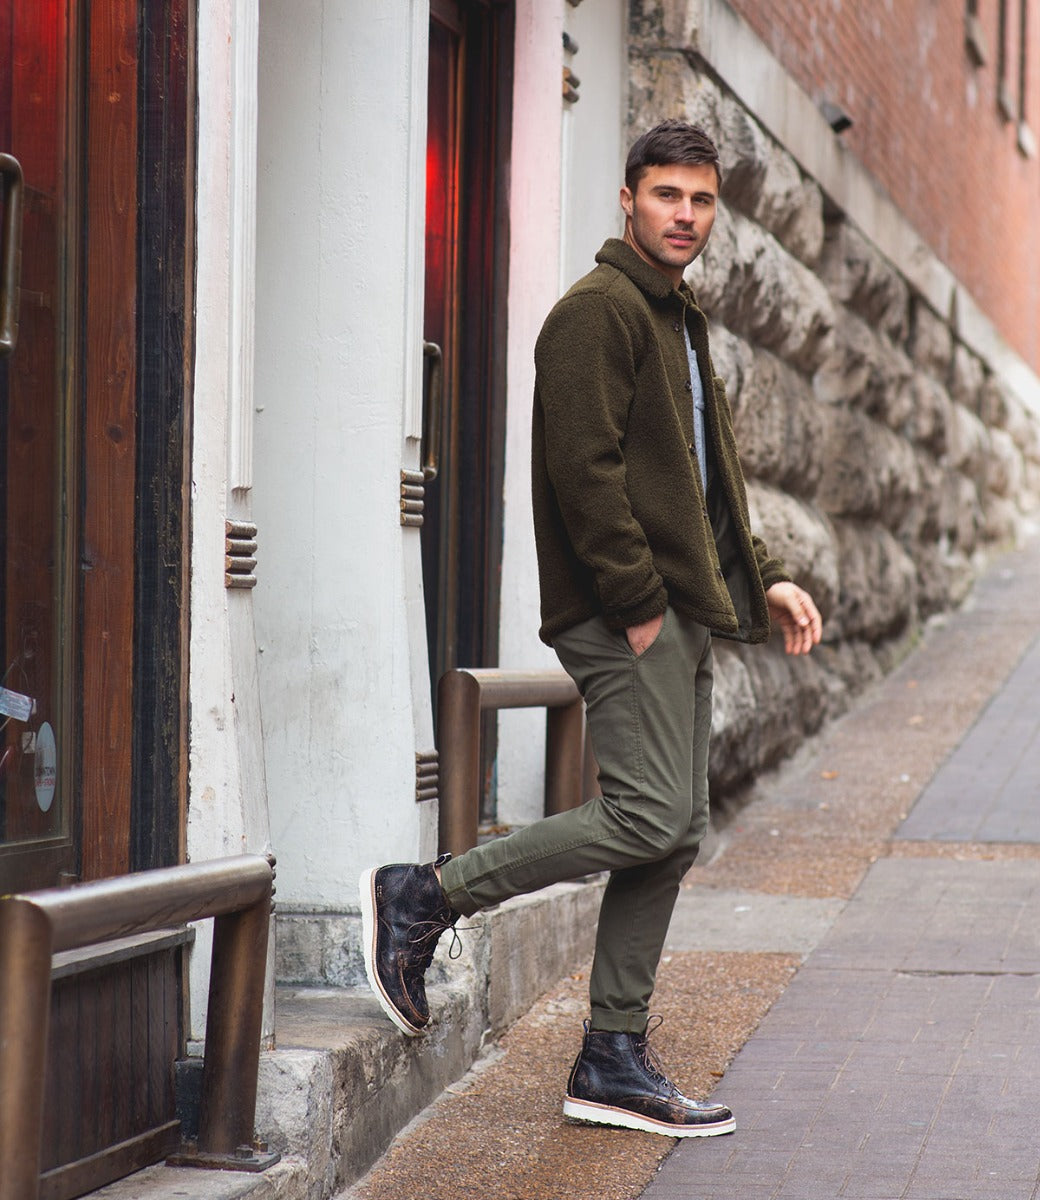 A man in a green jacket and pants leans against a brick wall on a city street, wearing Bed Stu Lincoln men's leather boots, and looking casually towards the camera.